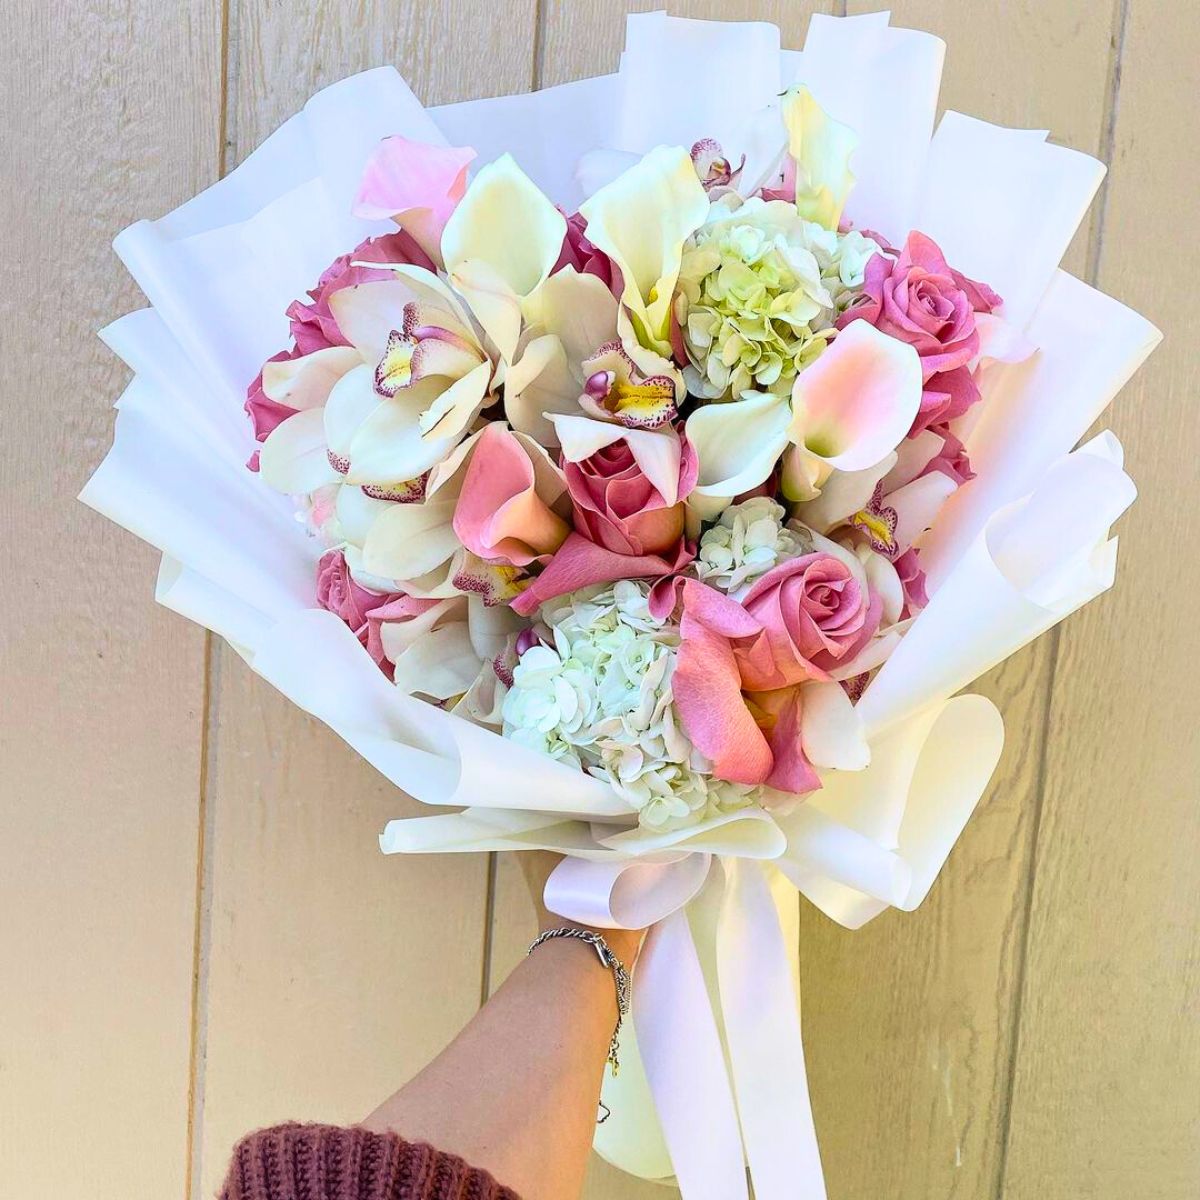 Delicate white and pink feminine bouquet